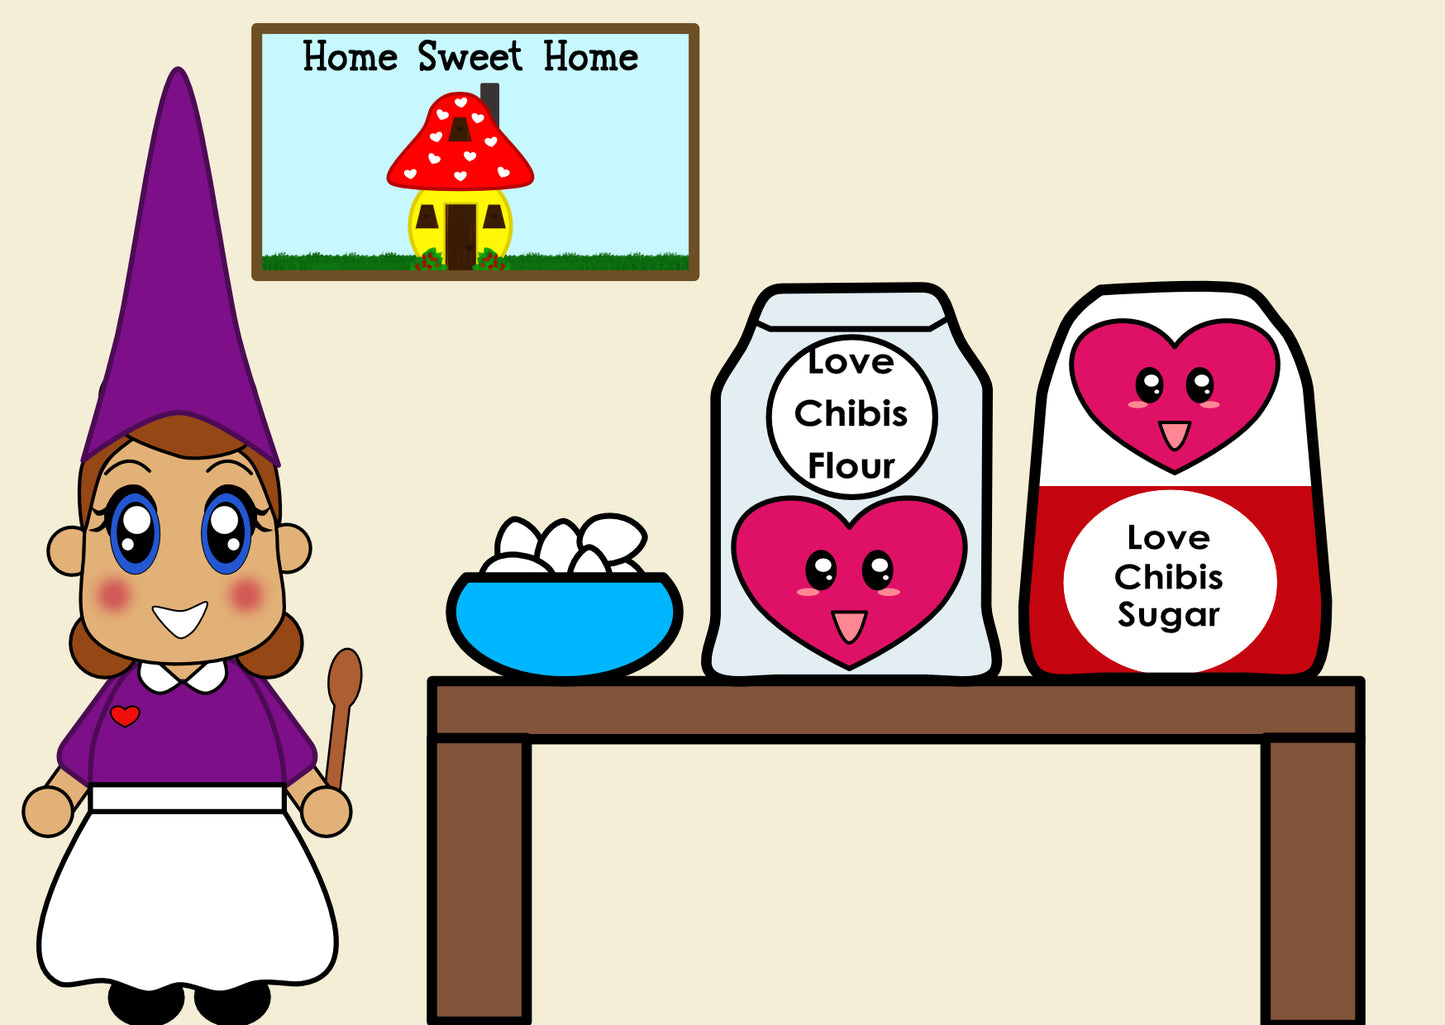 Love Chibi gnome holding a spoon next to a table with eggs, flour and sugar